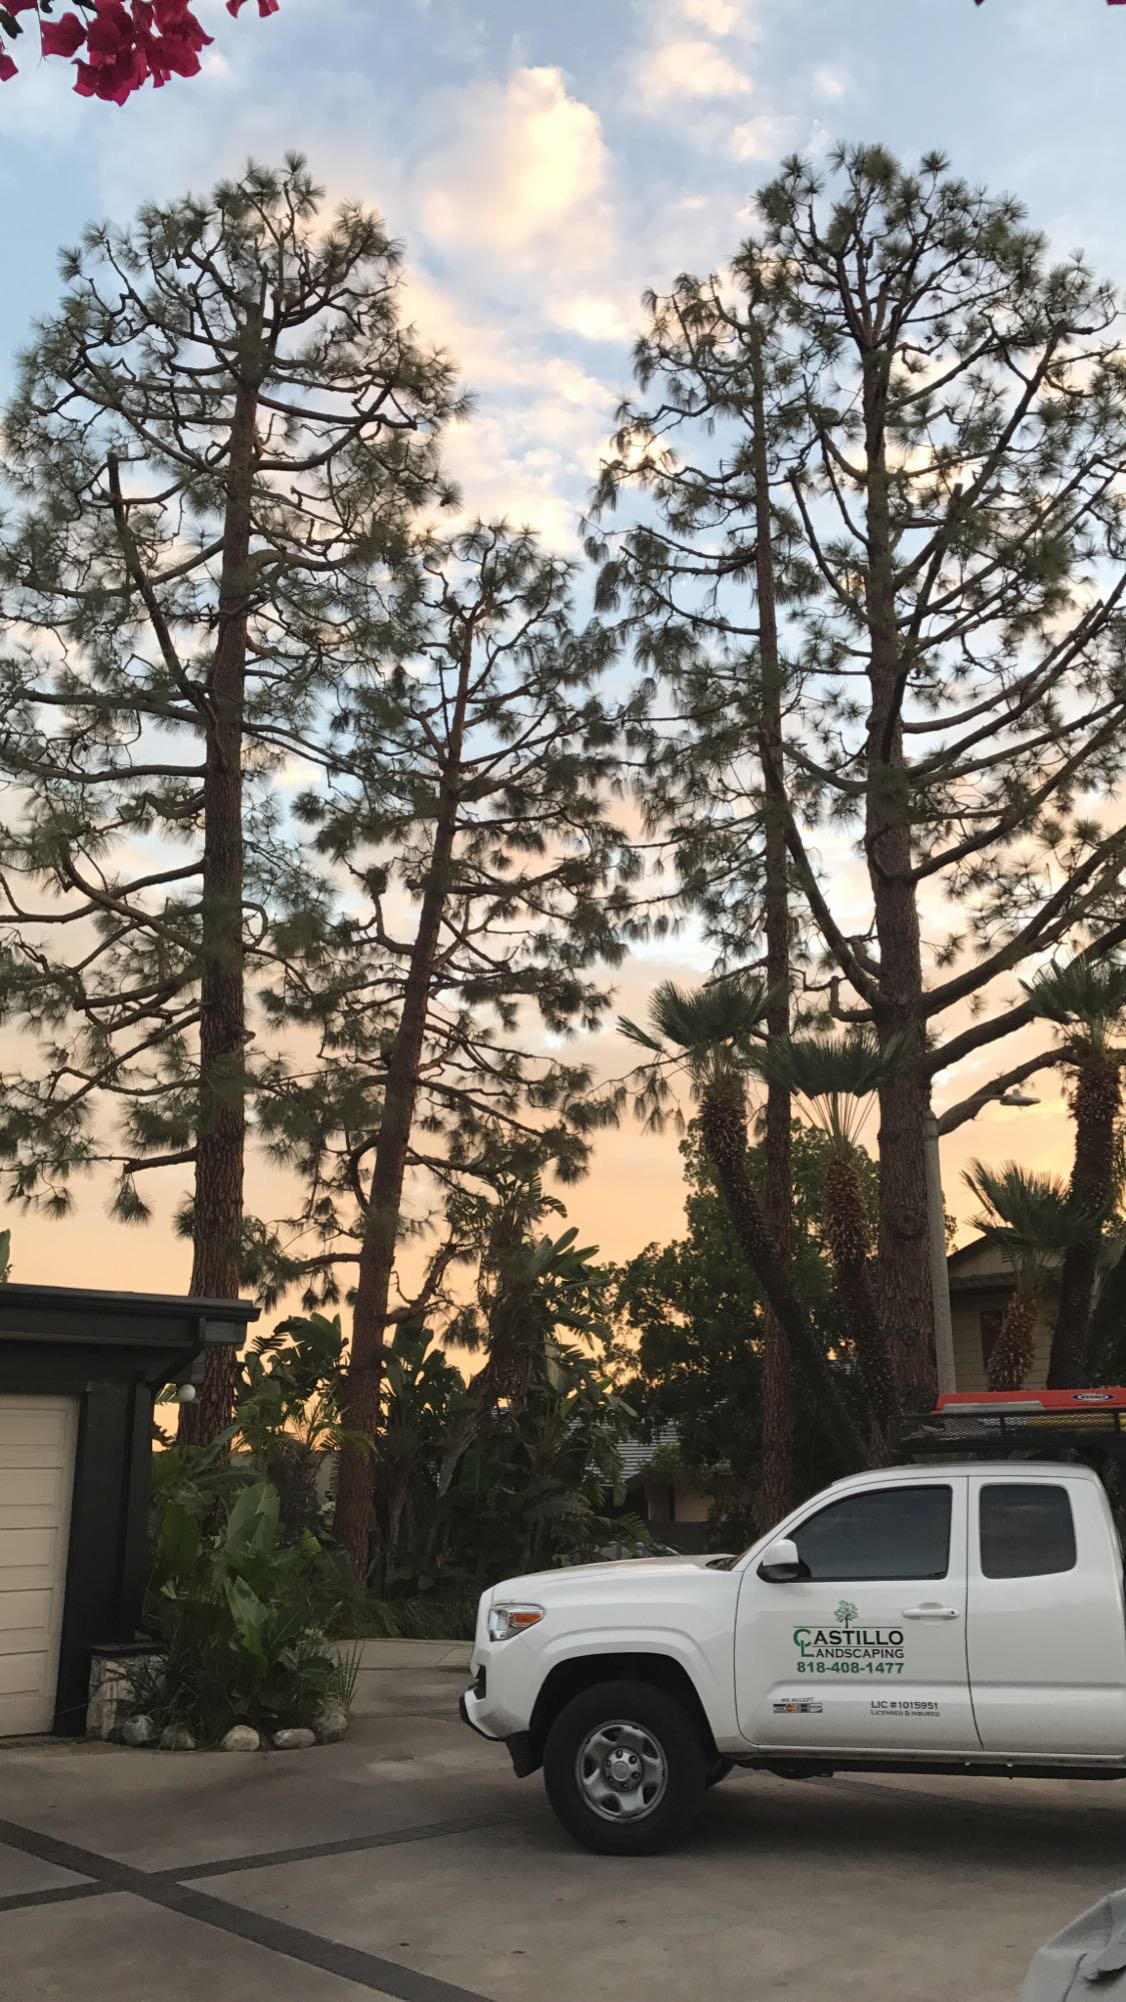 tree trimming in los angeles